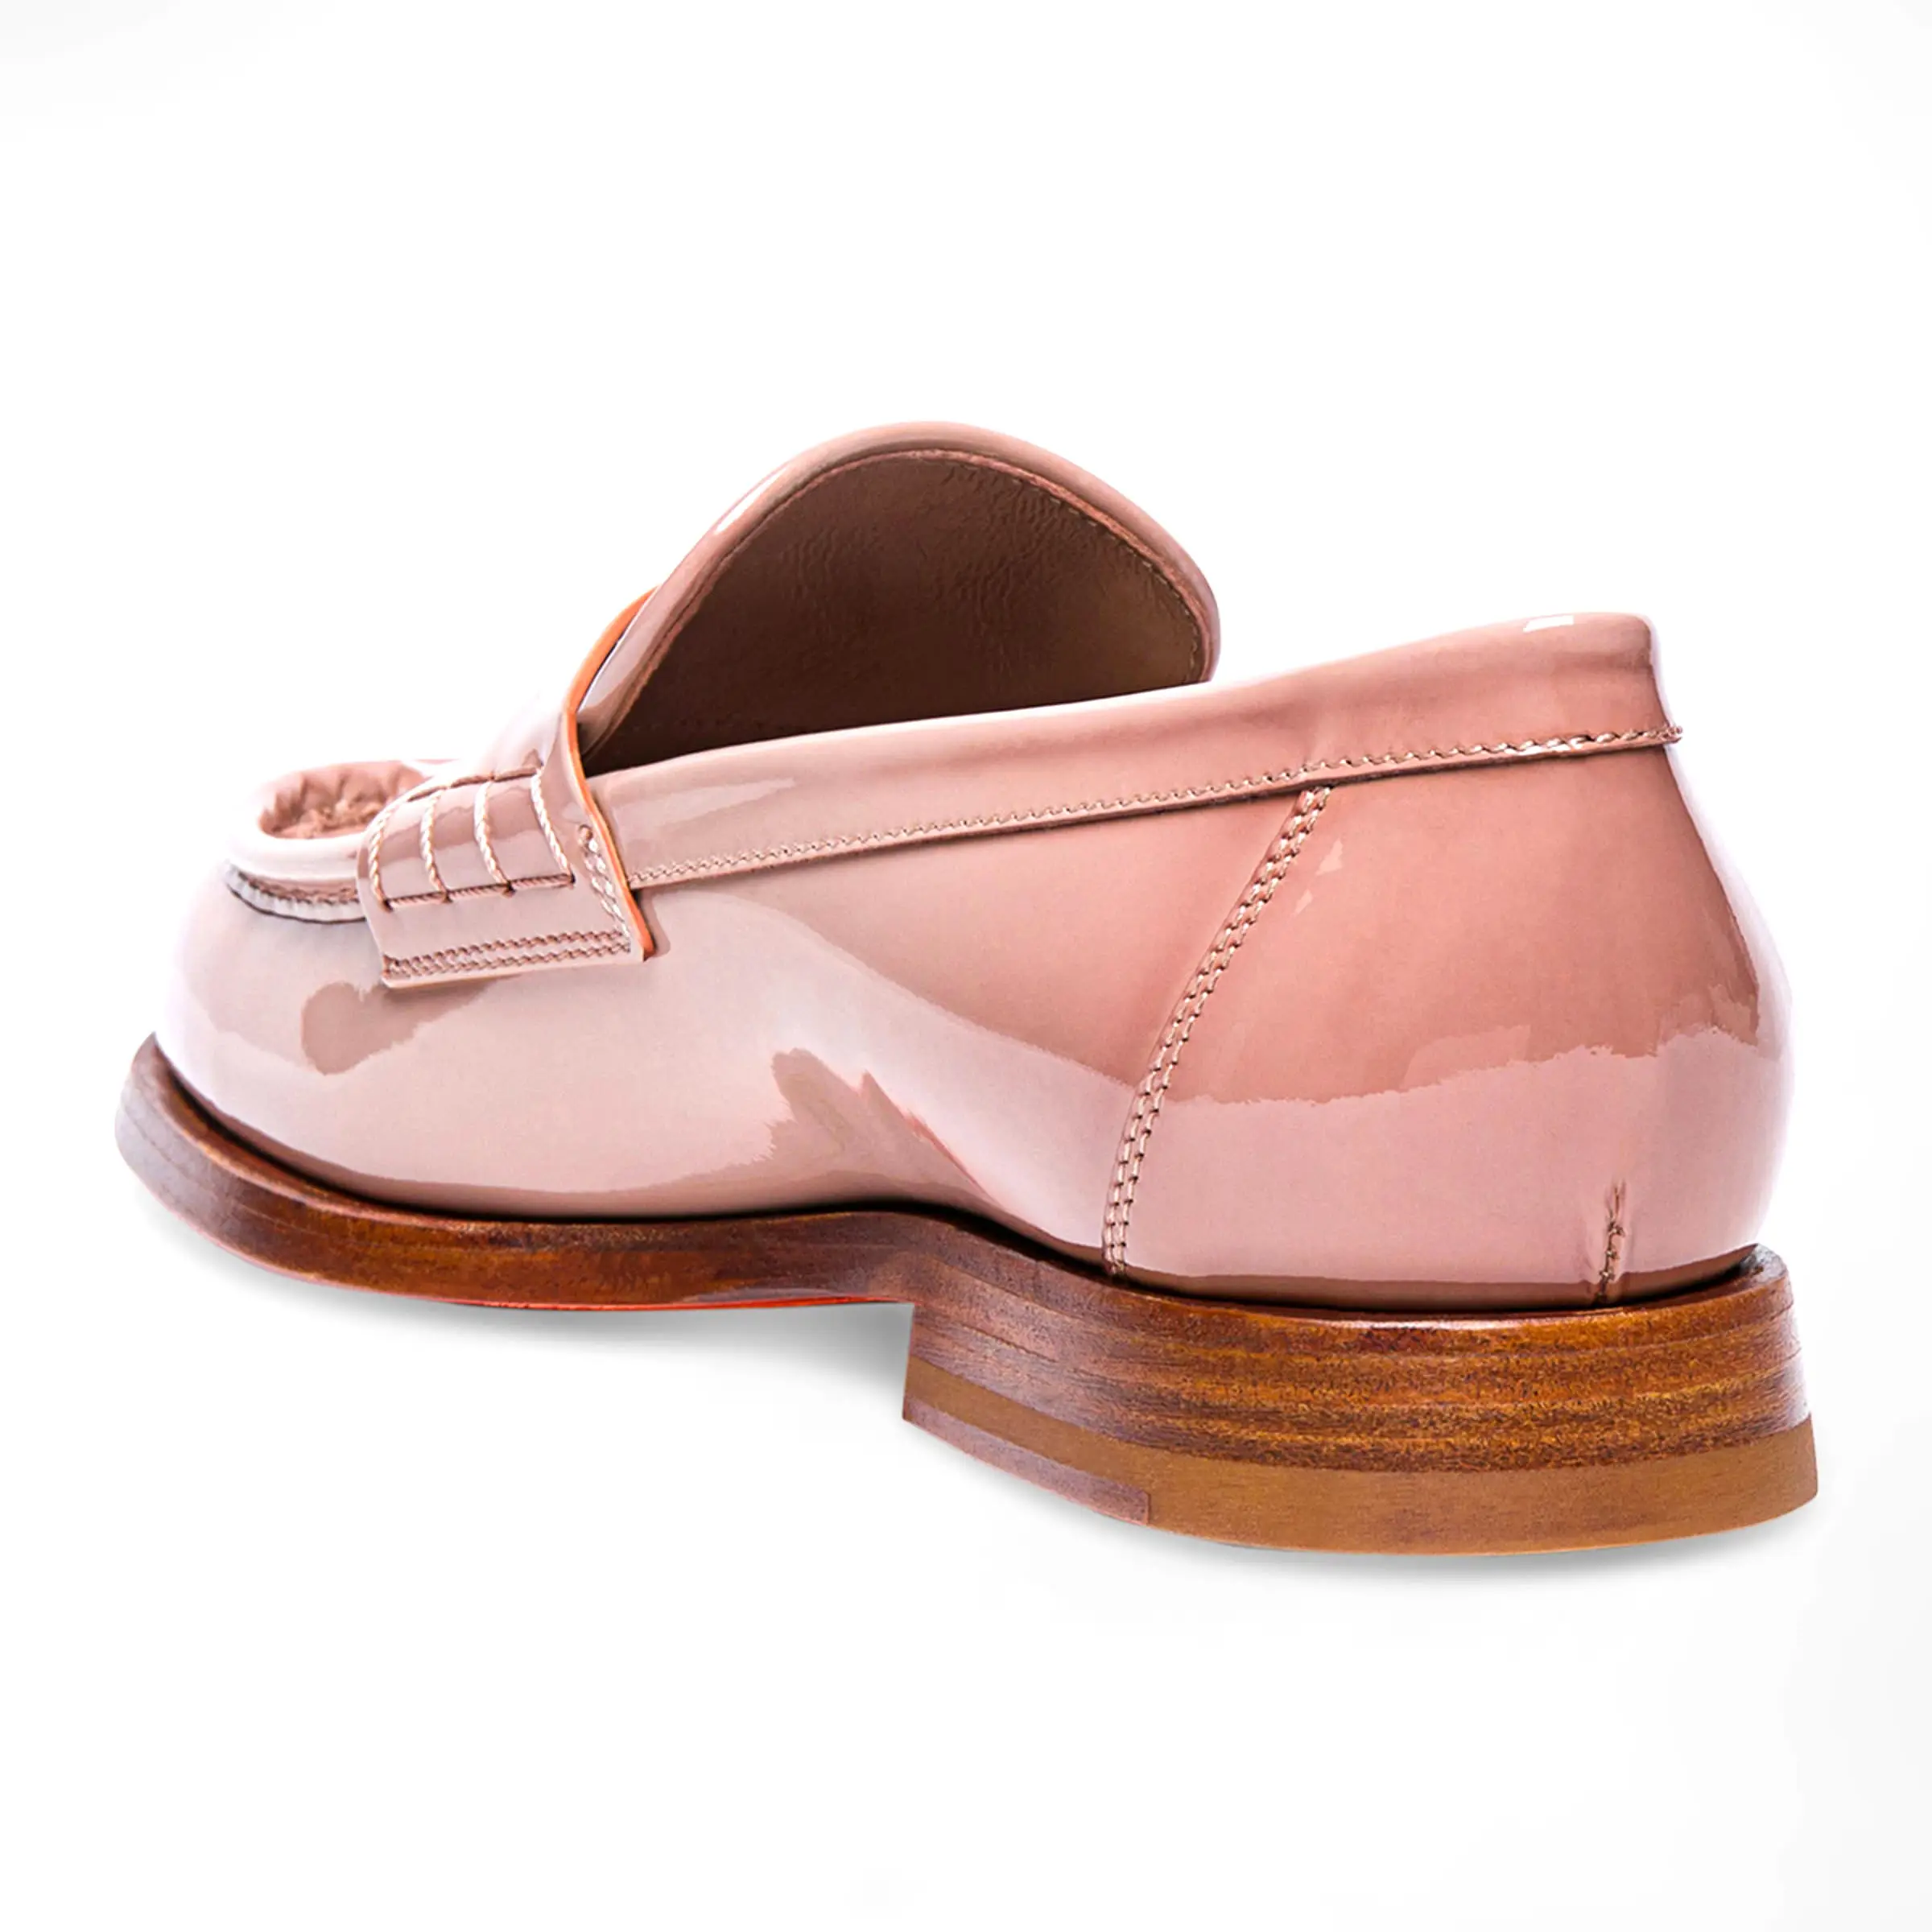 High Quality Finish Leather Upper Leather Sole Leather Lining Loafer Flat Jewish Woman Loafers Shoes